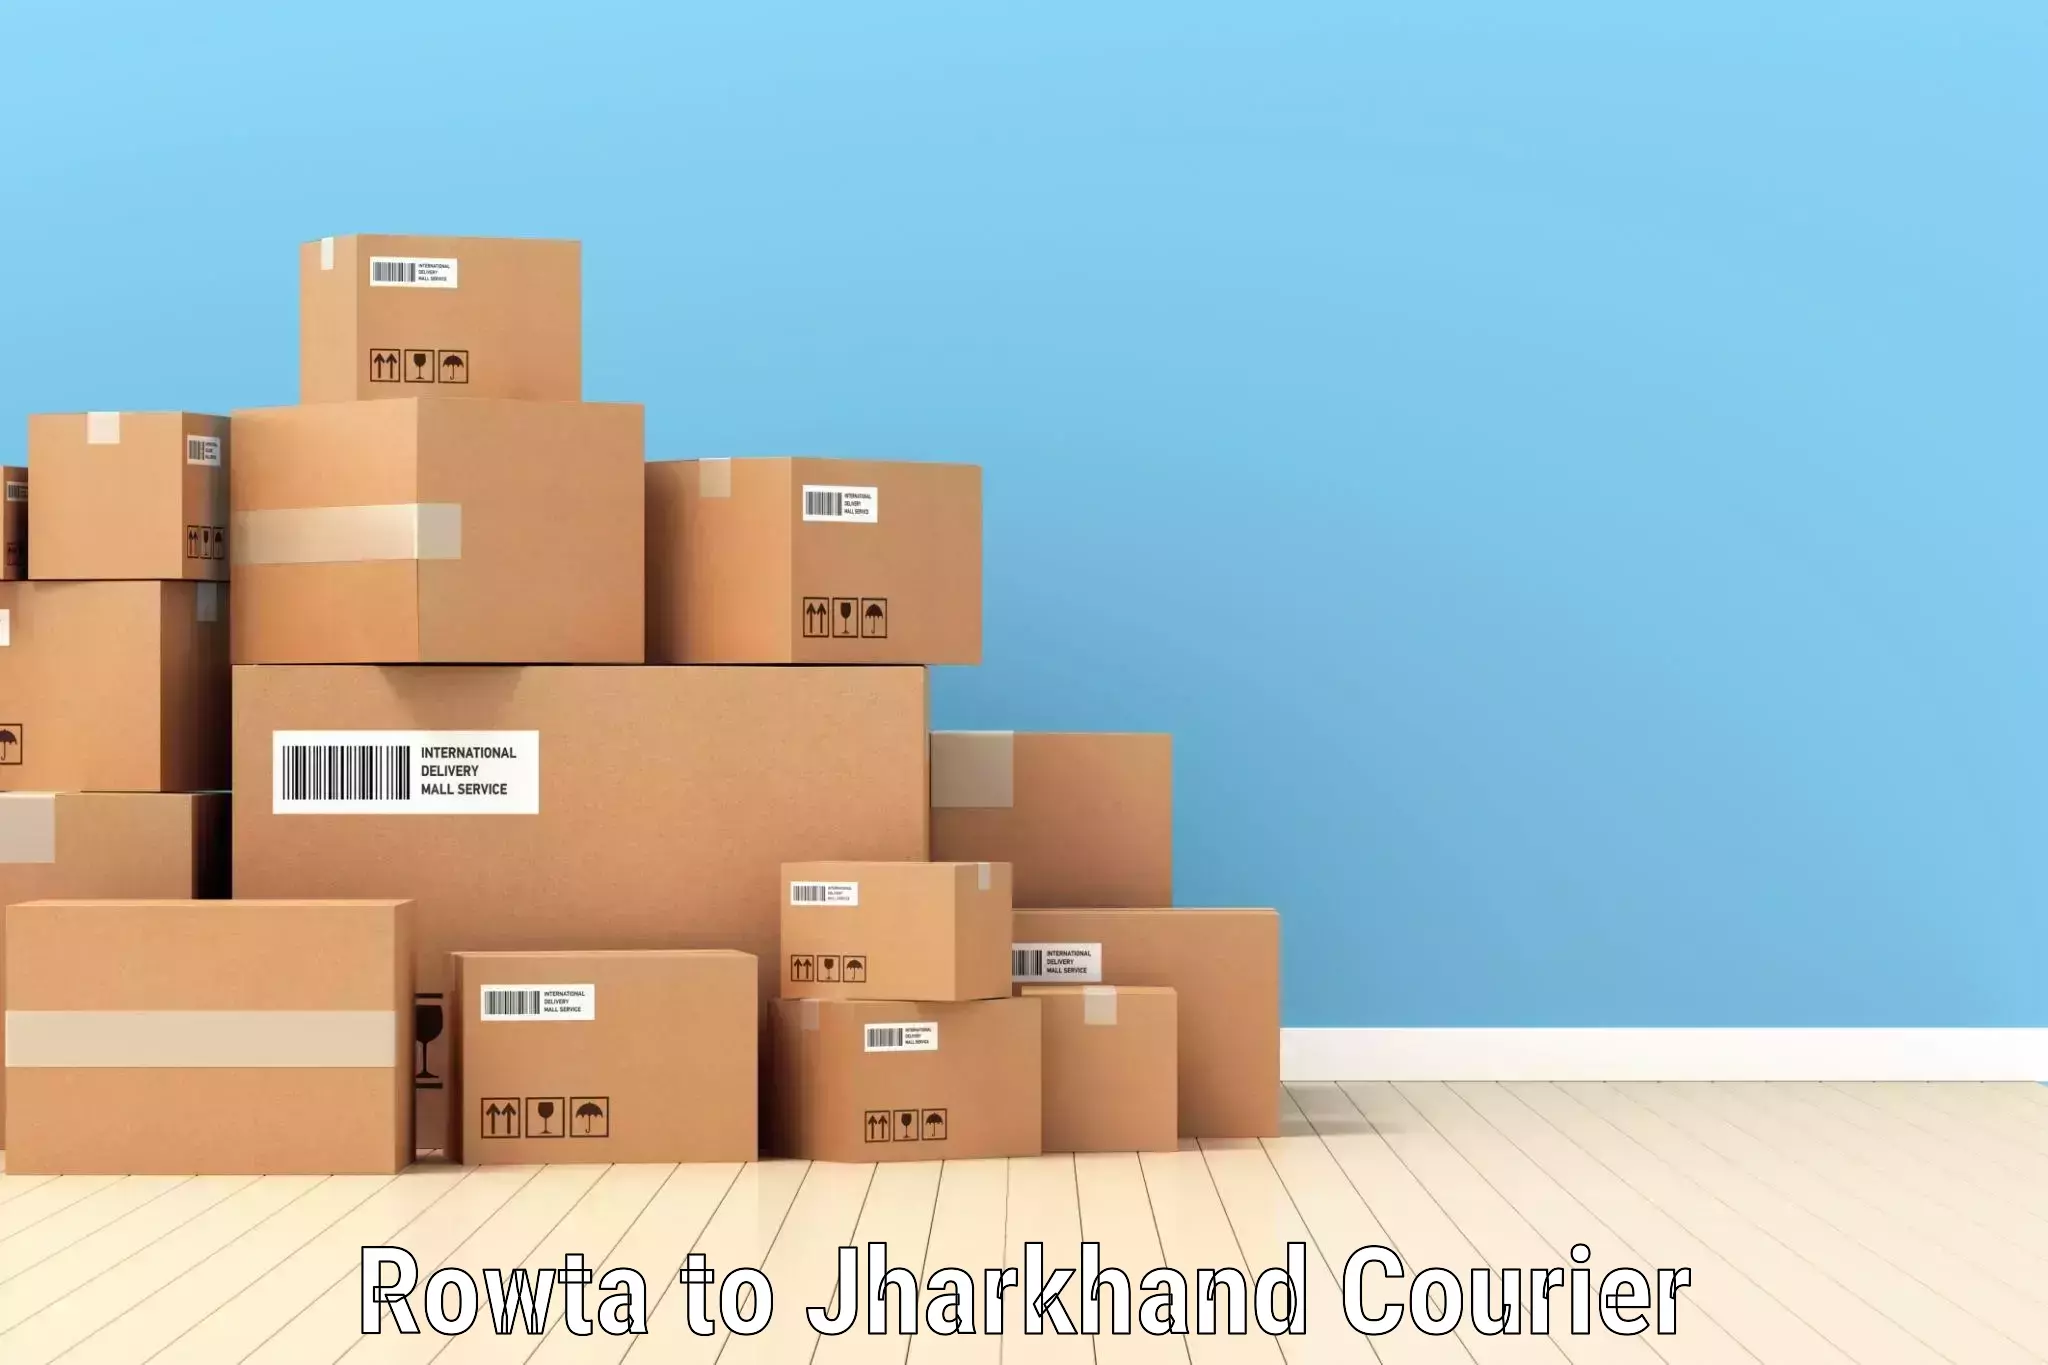 Express mail service in Rowta to Jharkhand